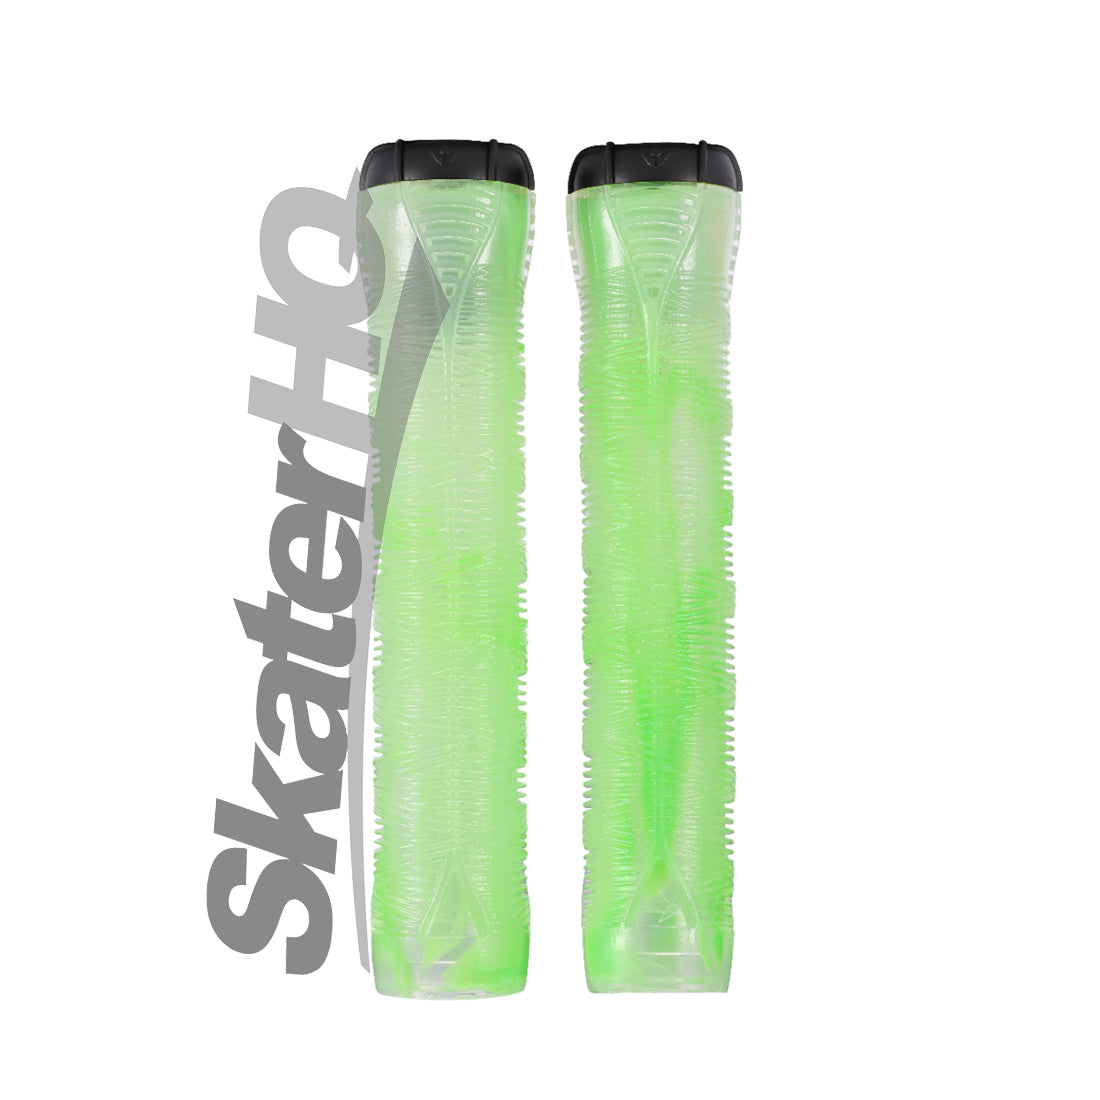 Envy V2 Hand Grips - Smoke Green Scooter Grips